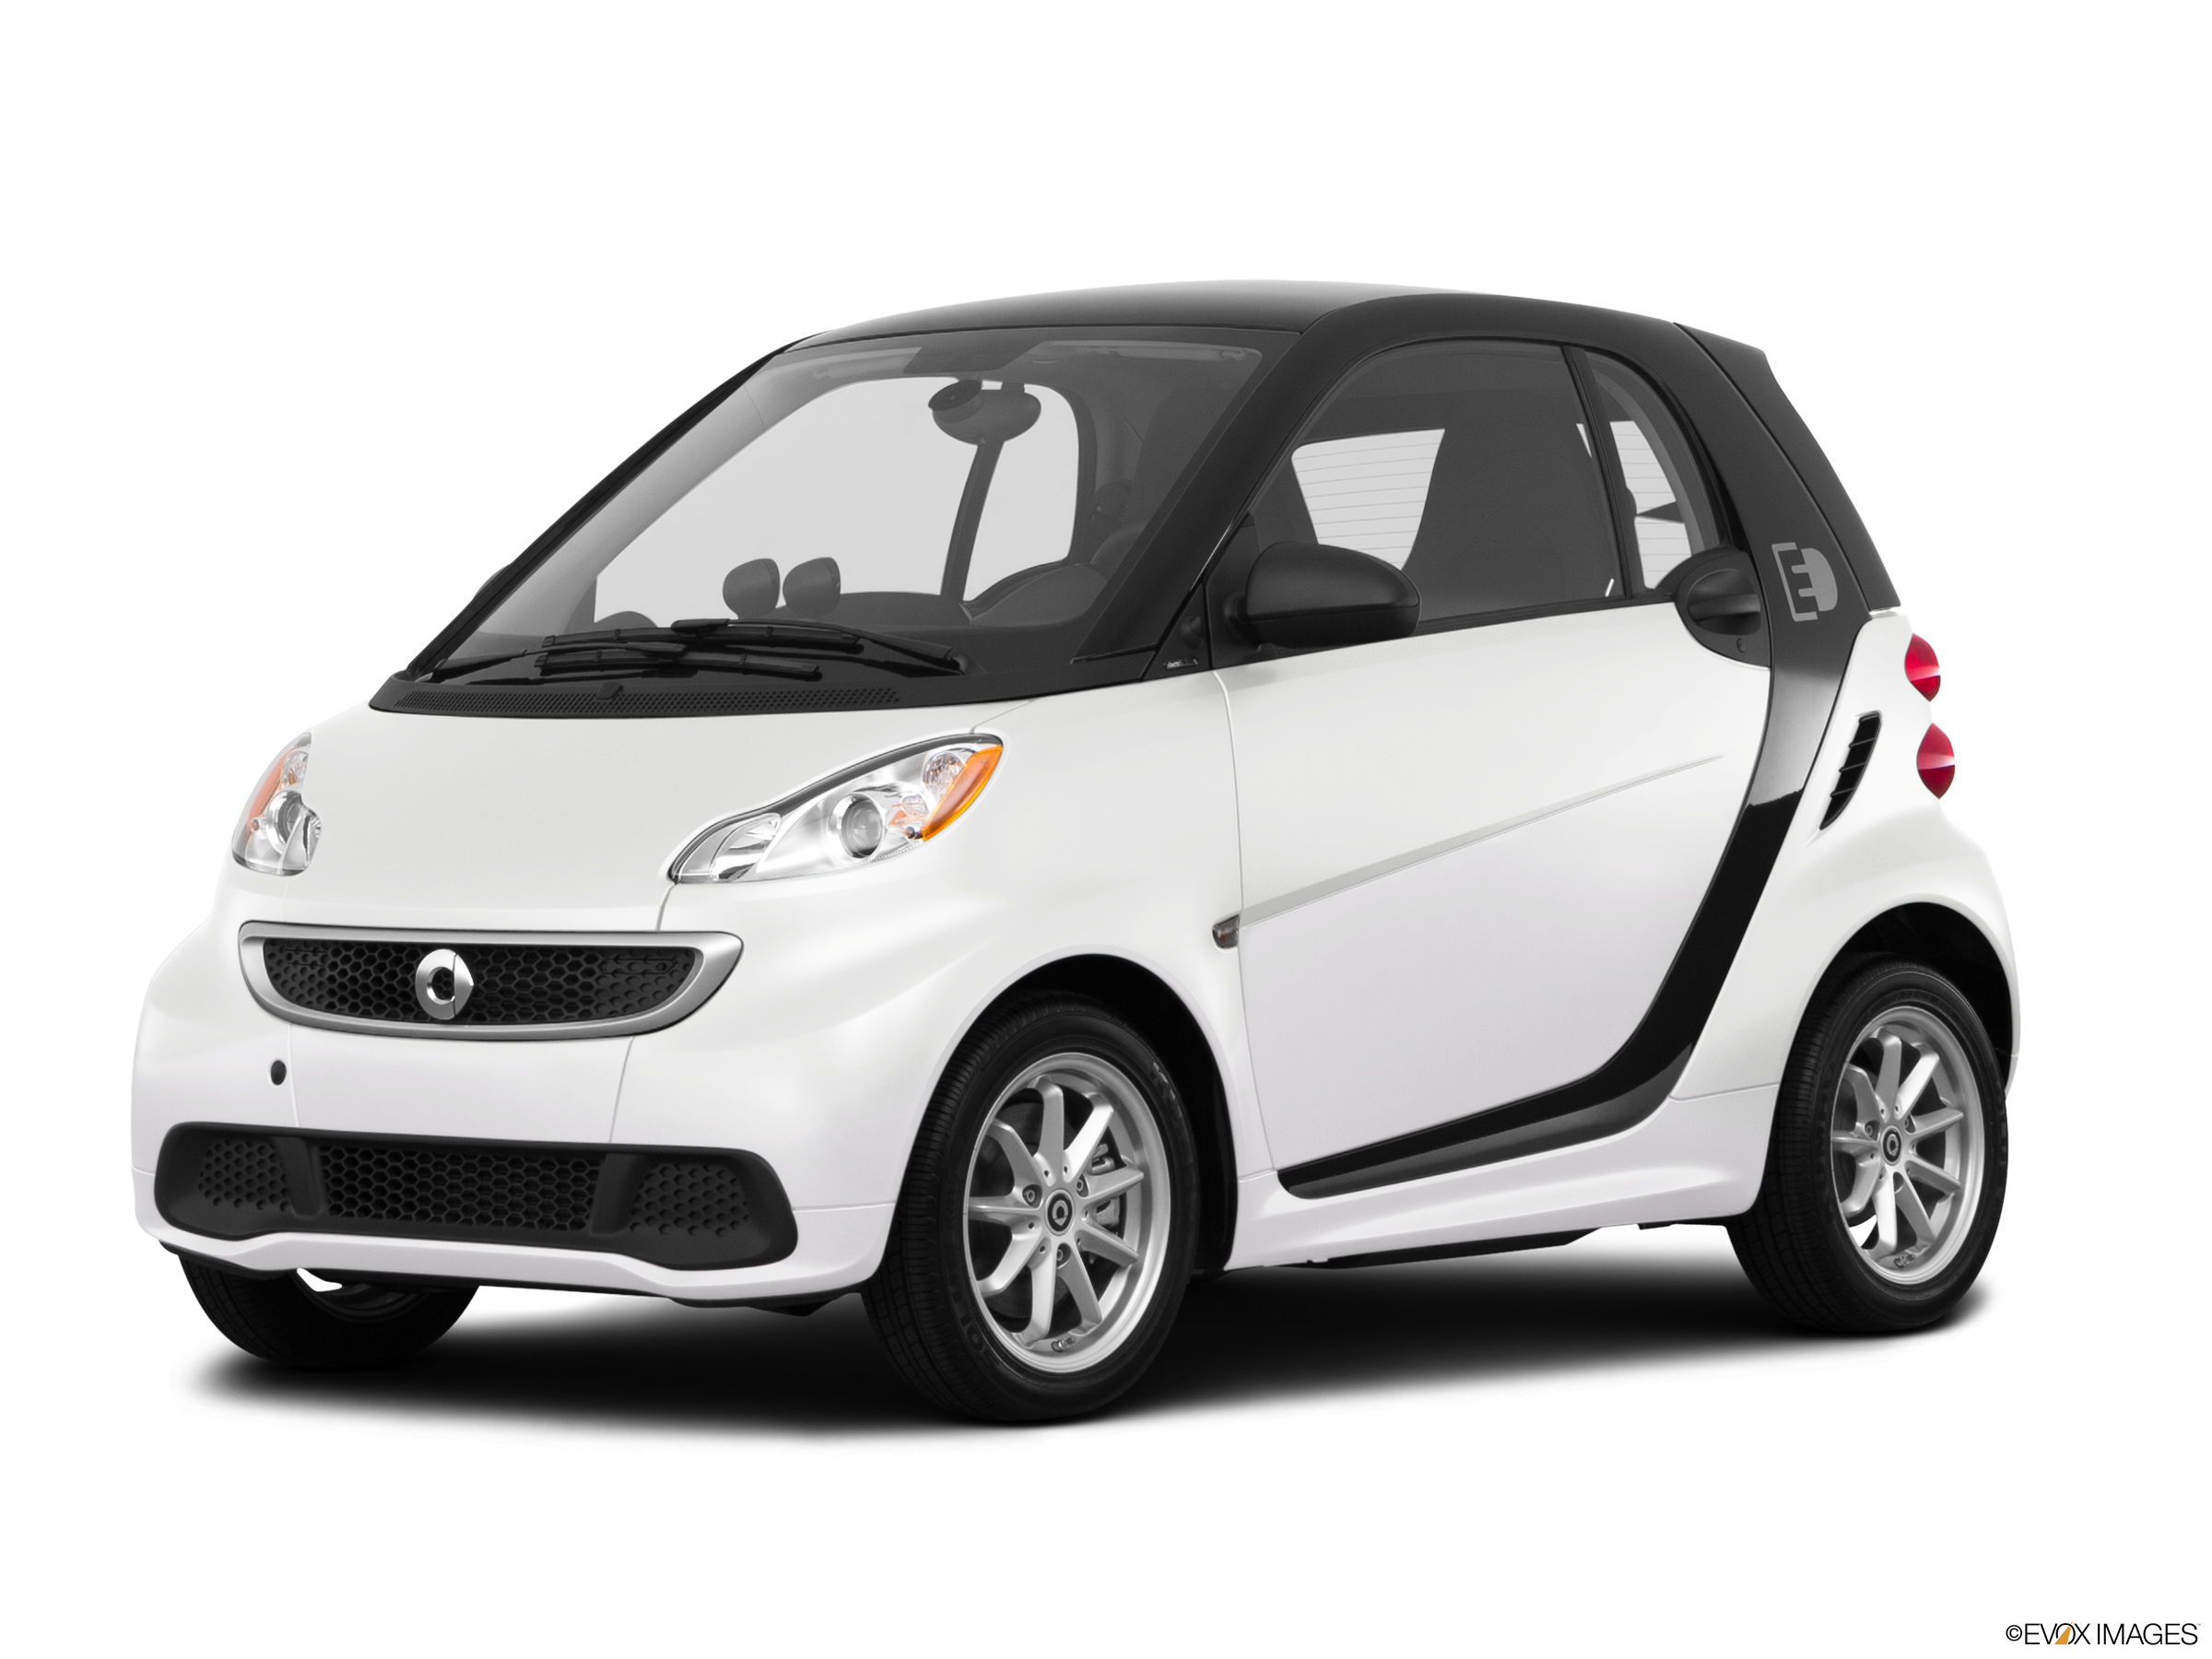 2016 smart fortwo electric Price, Value, Ratings & Reviews